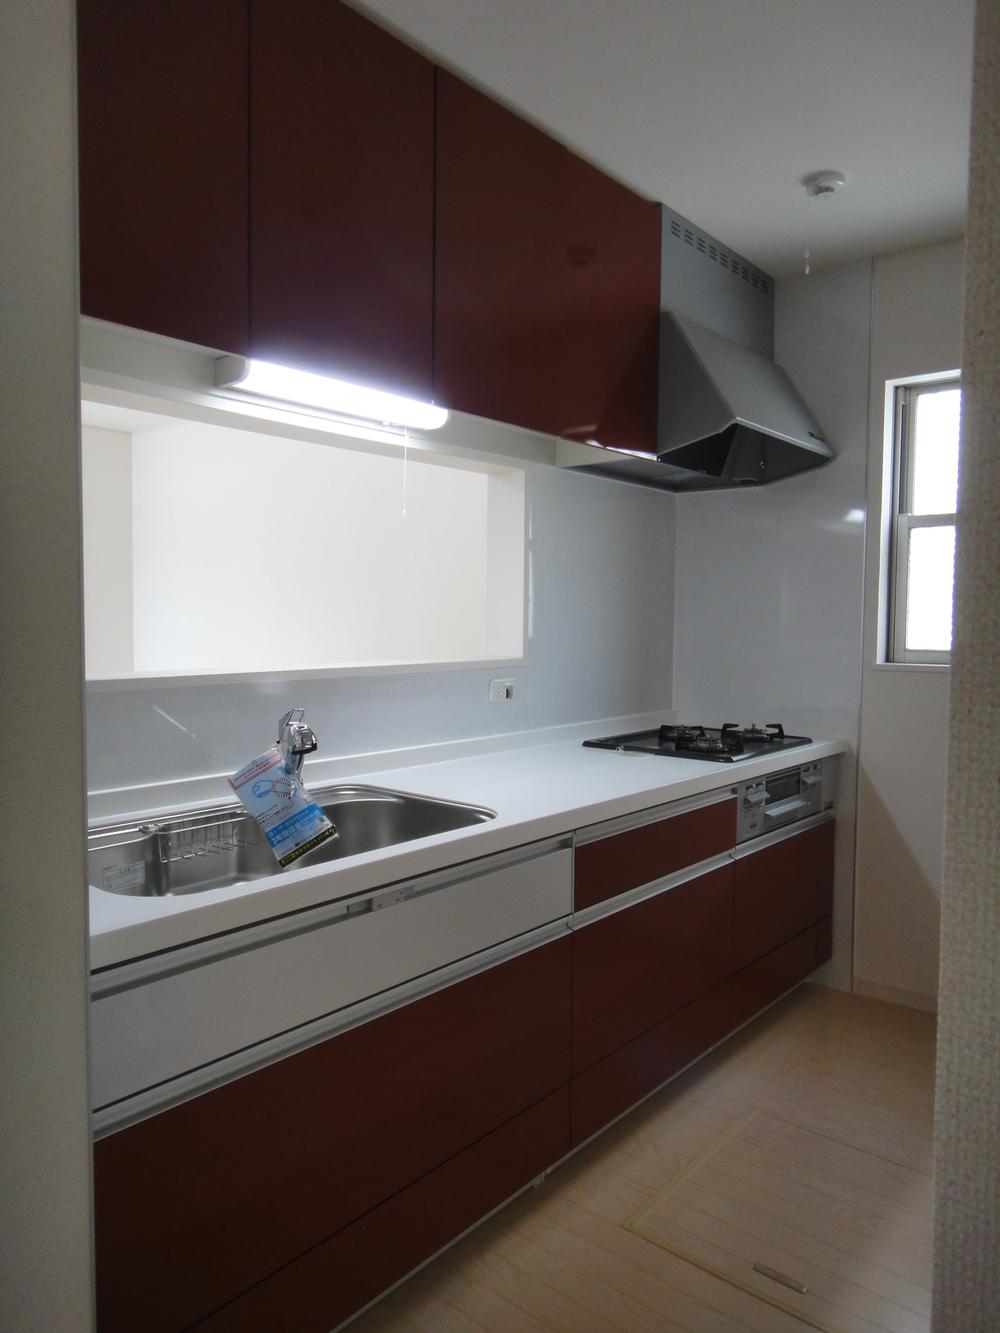 Same specifications photo (kitchen). Color pattern is there some